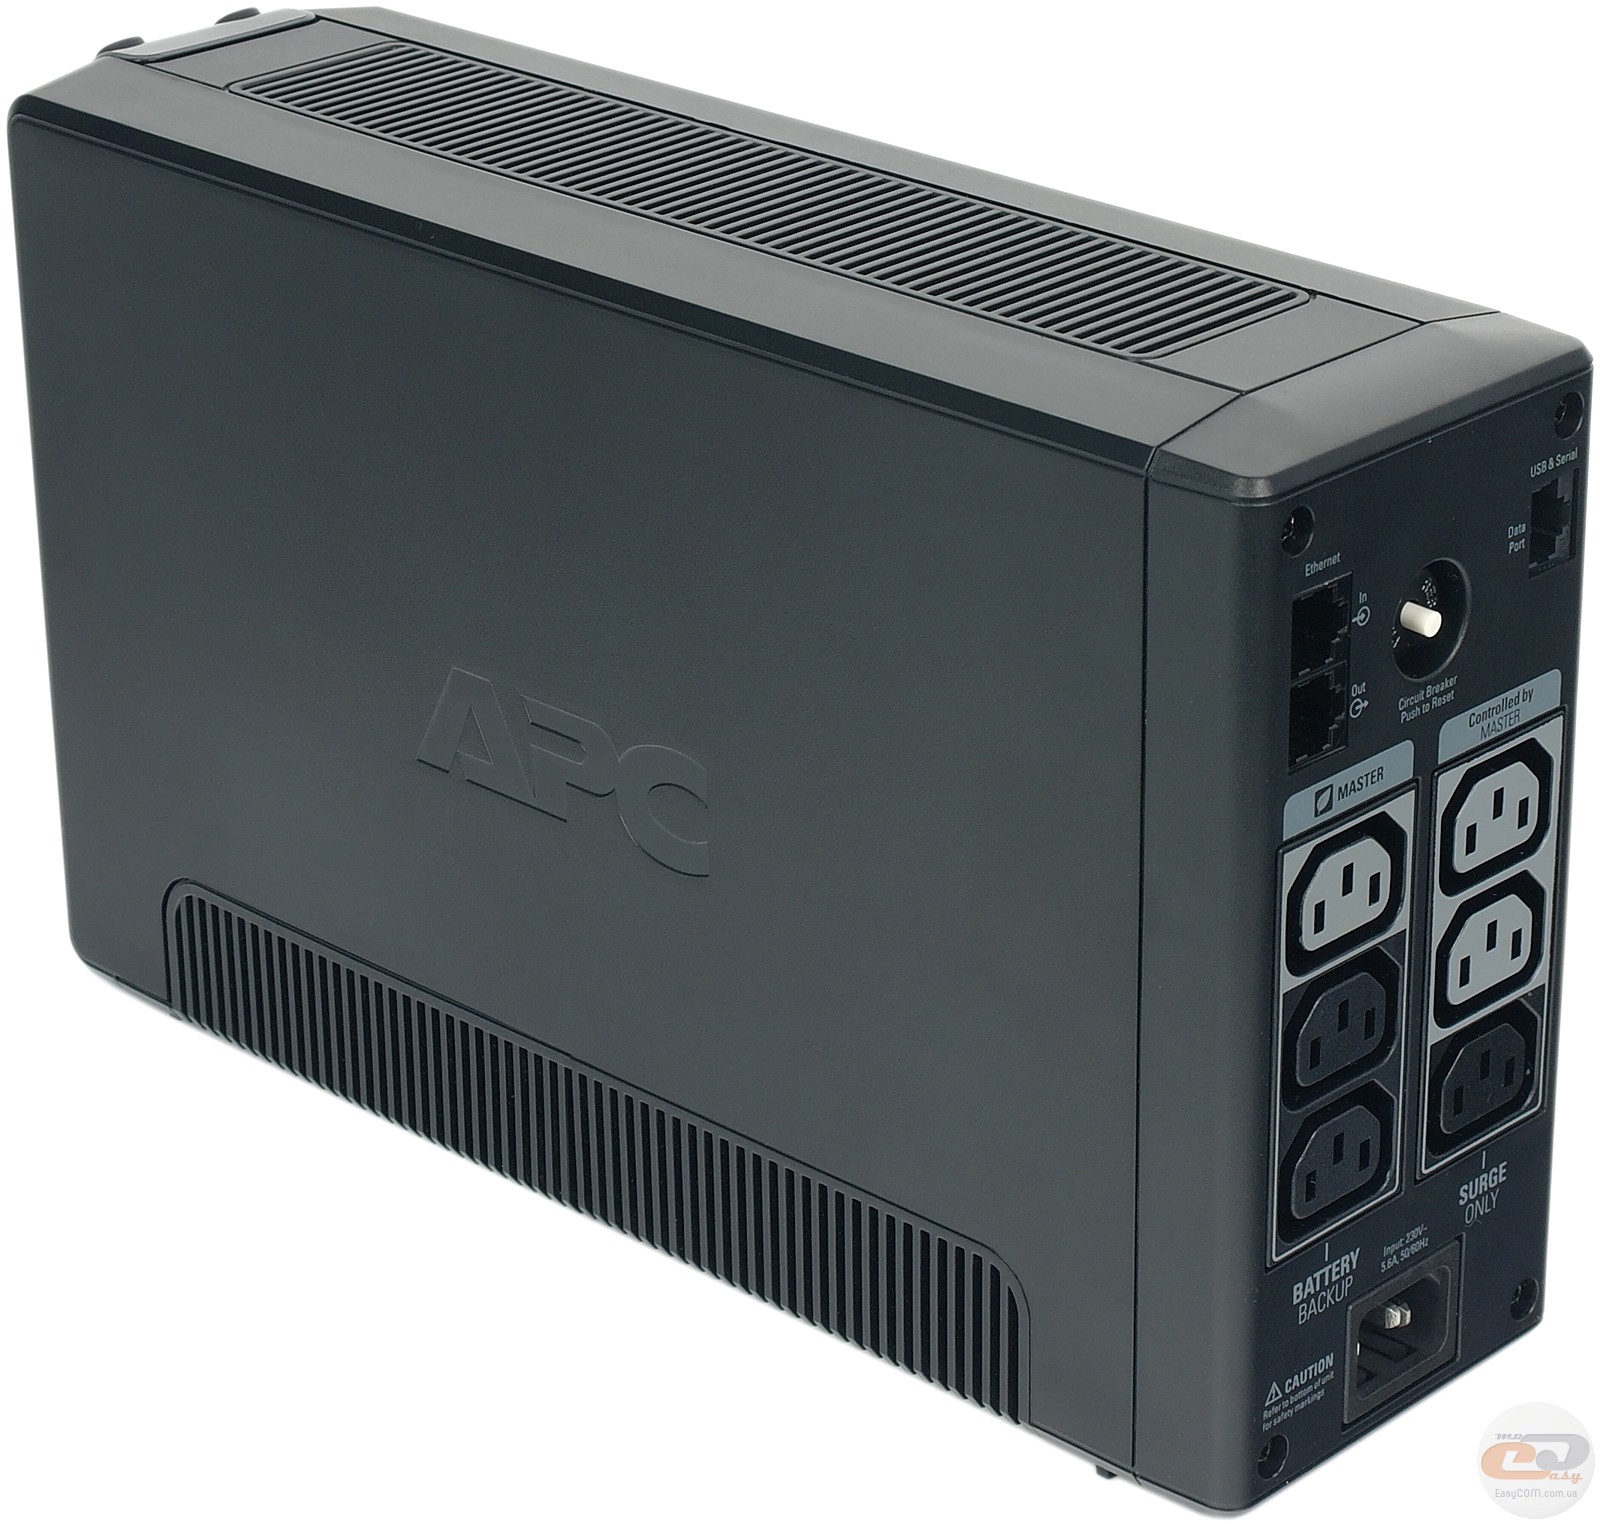 APC BackUPS Pro 550 UPS review and testing.